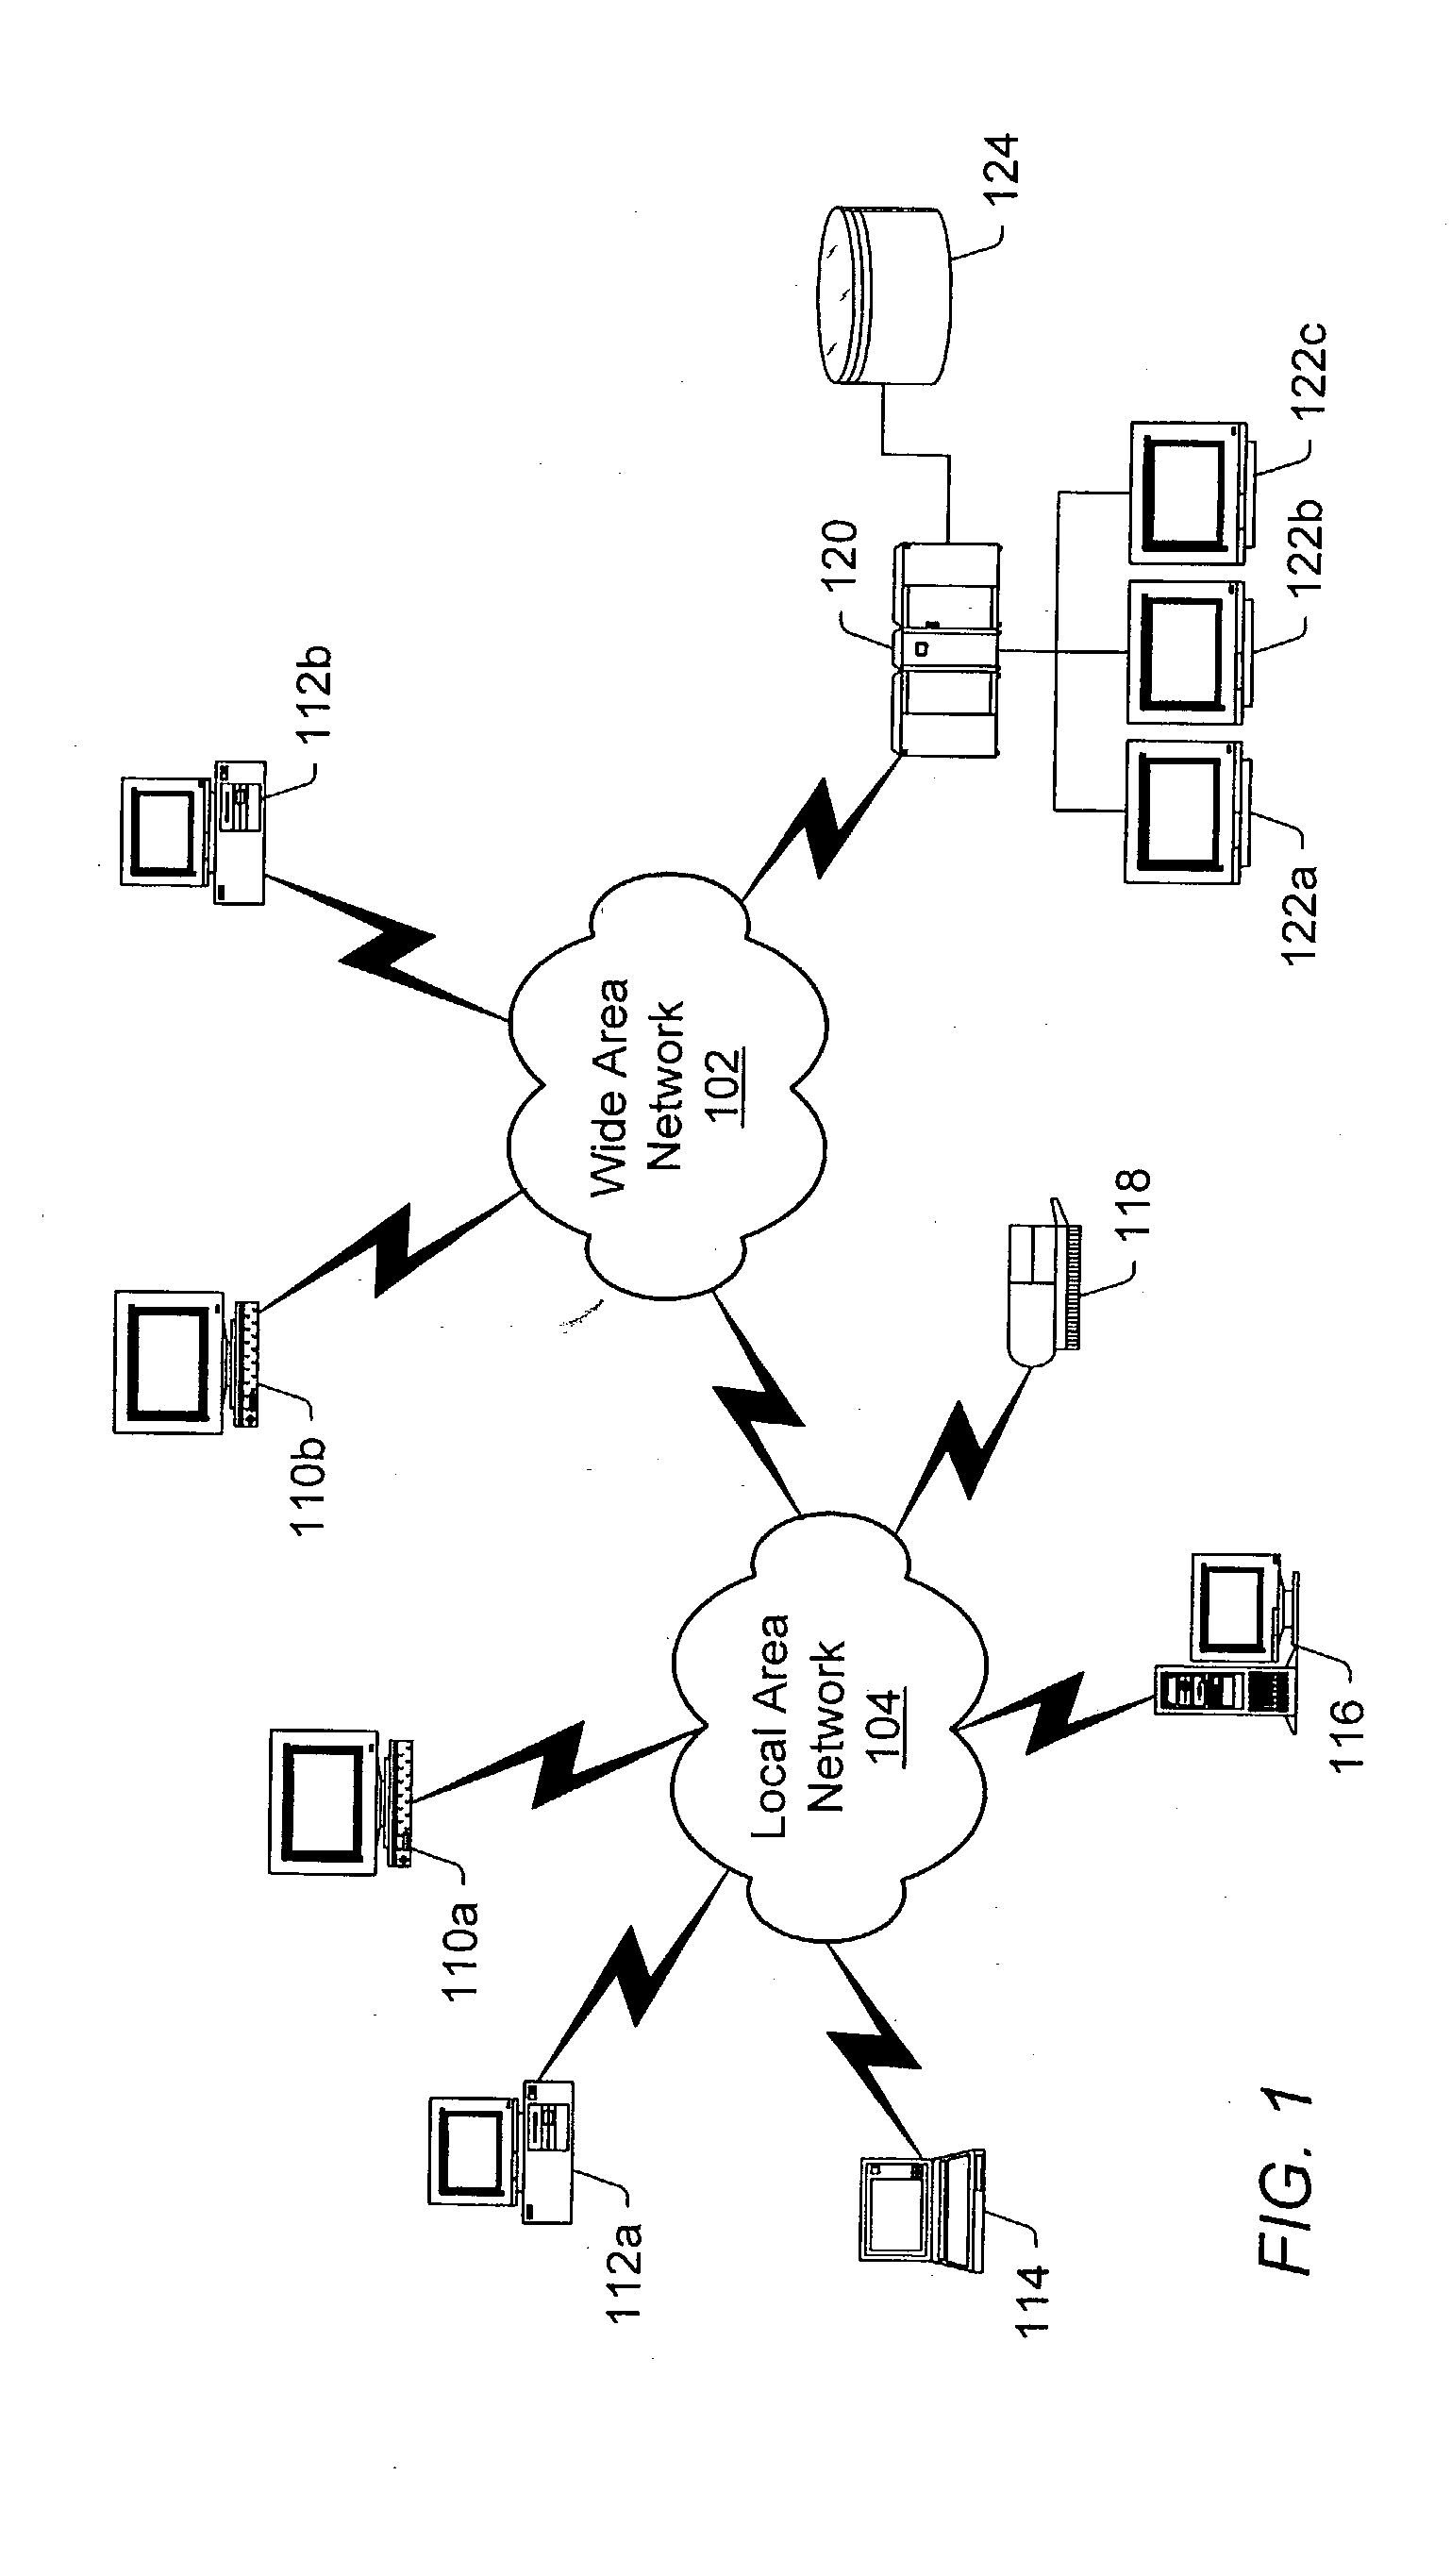 Computerized method and system for estimating an effect on liability using a comparison of the actual speed of vehicles with a specified speed